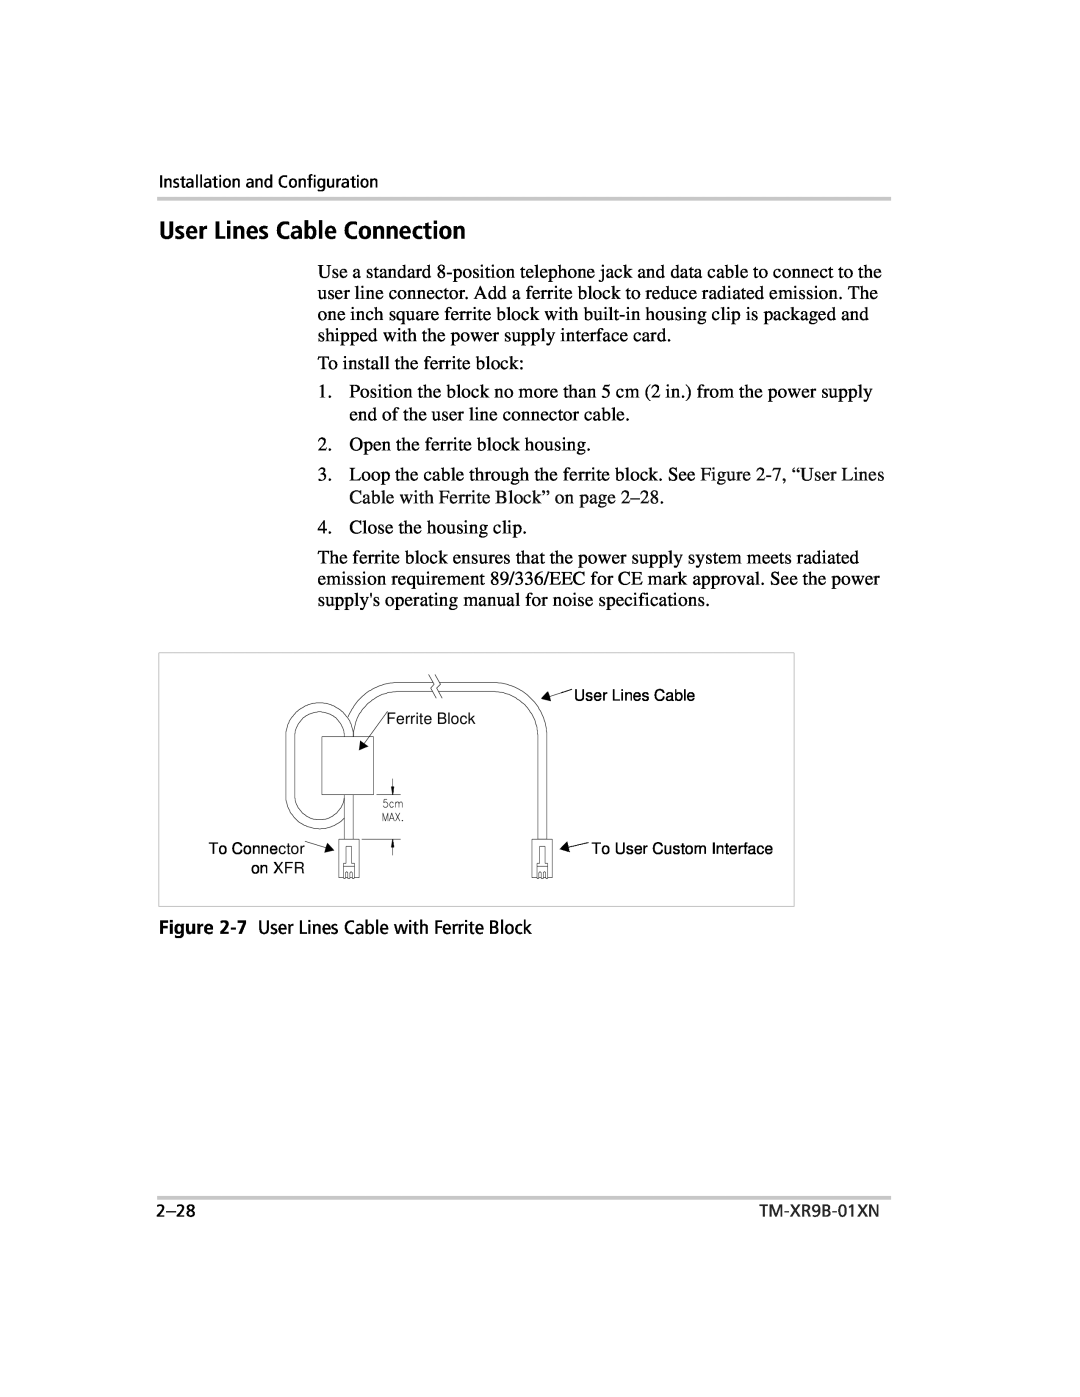 Xantrex Technology ENET-XFR3 manual User Lines Cable Connection 